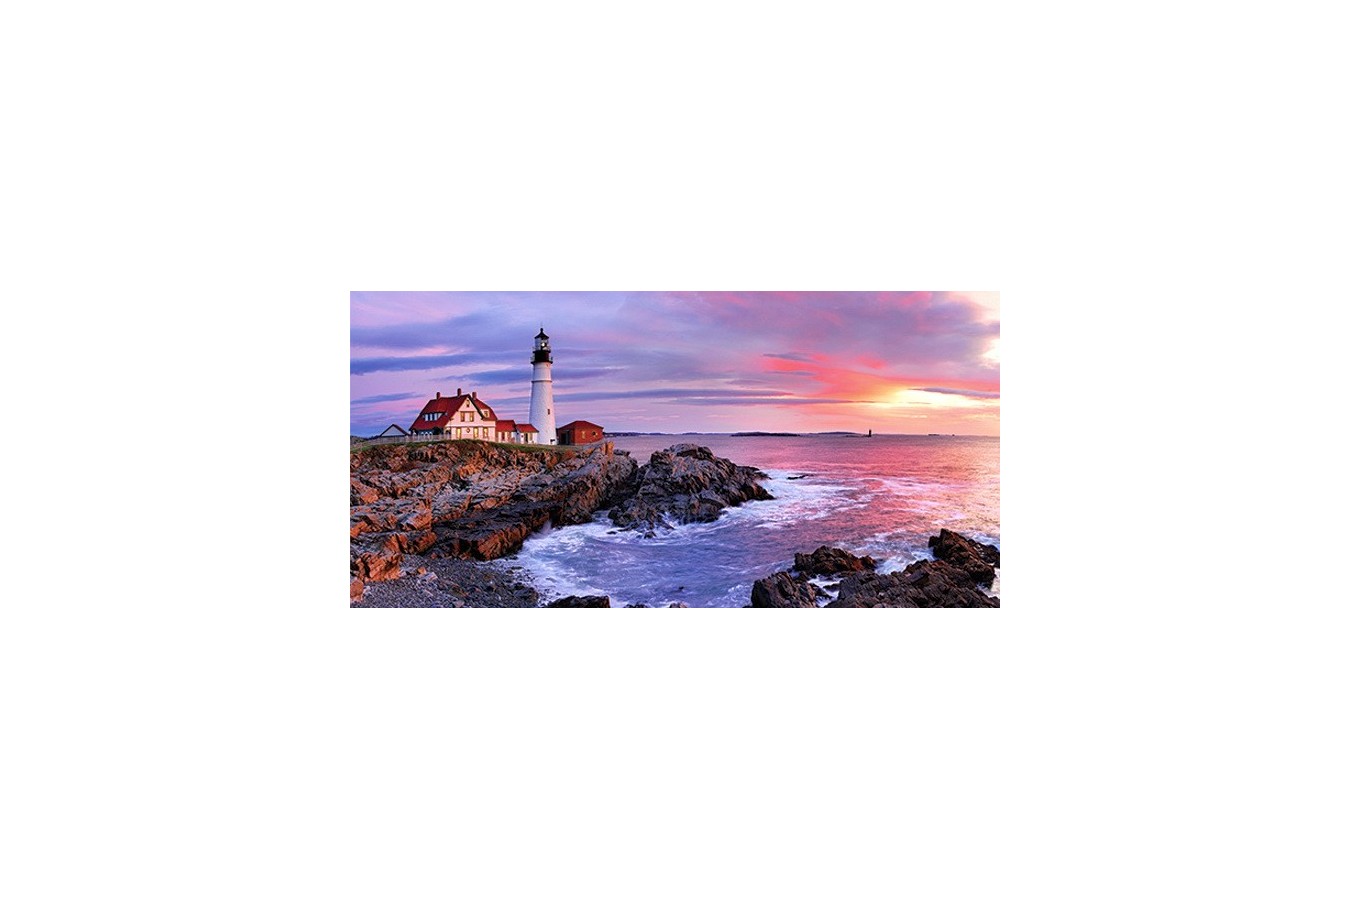 Puzzle Anatolian - Lighthouse at Portland Head, 1500 piese, panoramic (3787)